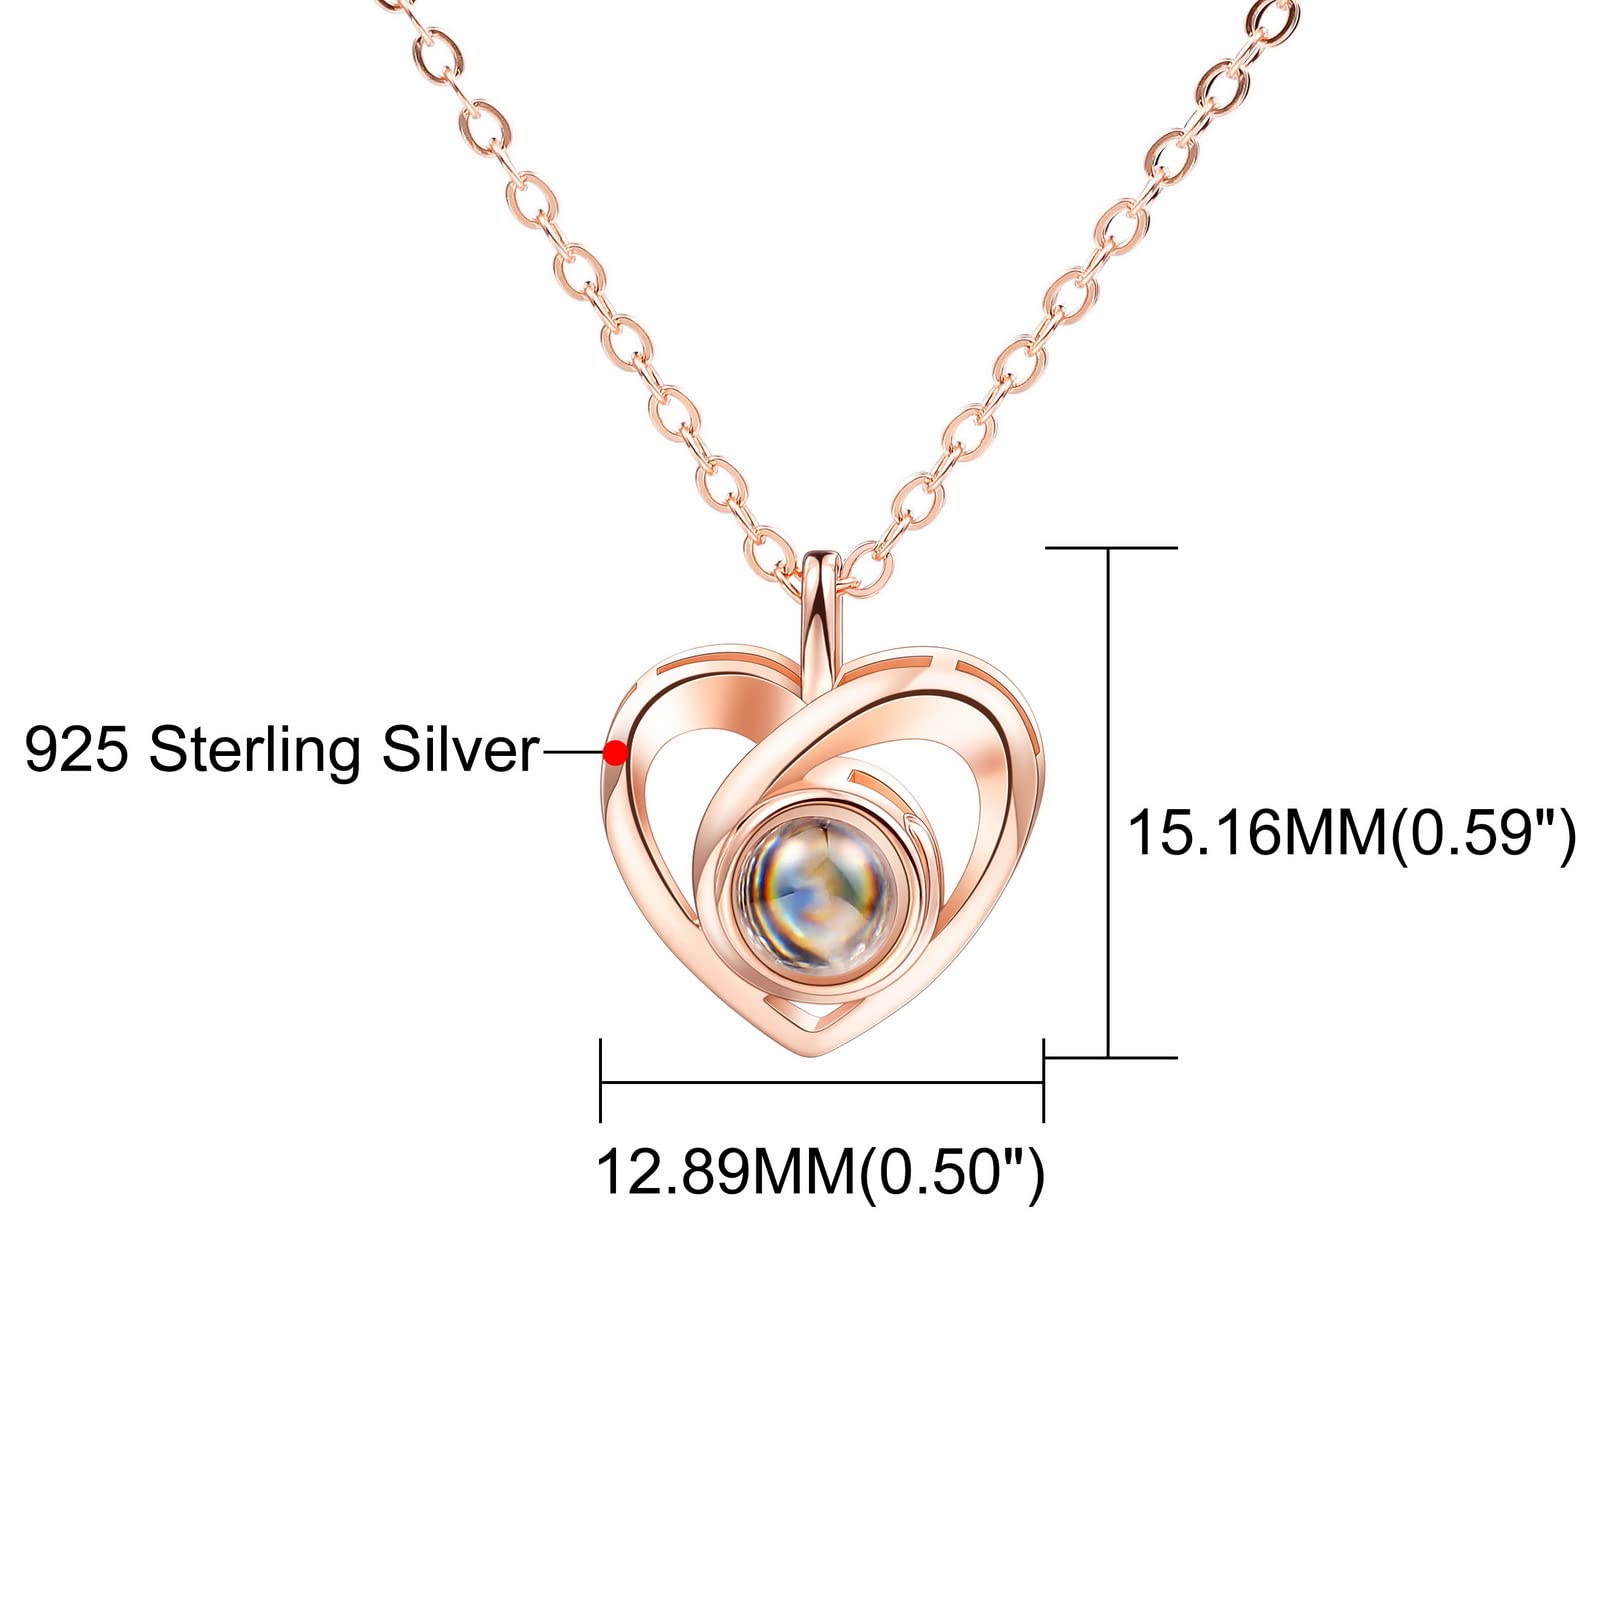 INBLUE Personalized Projection Picture Pendant 925 Sterling Silver Necklace Heart-Shaped Pendant Birthday Anniversary Jewelry Gifts for Her/Women/Mom/Girlfriend